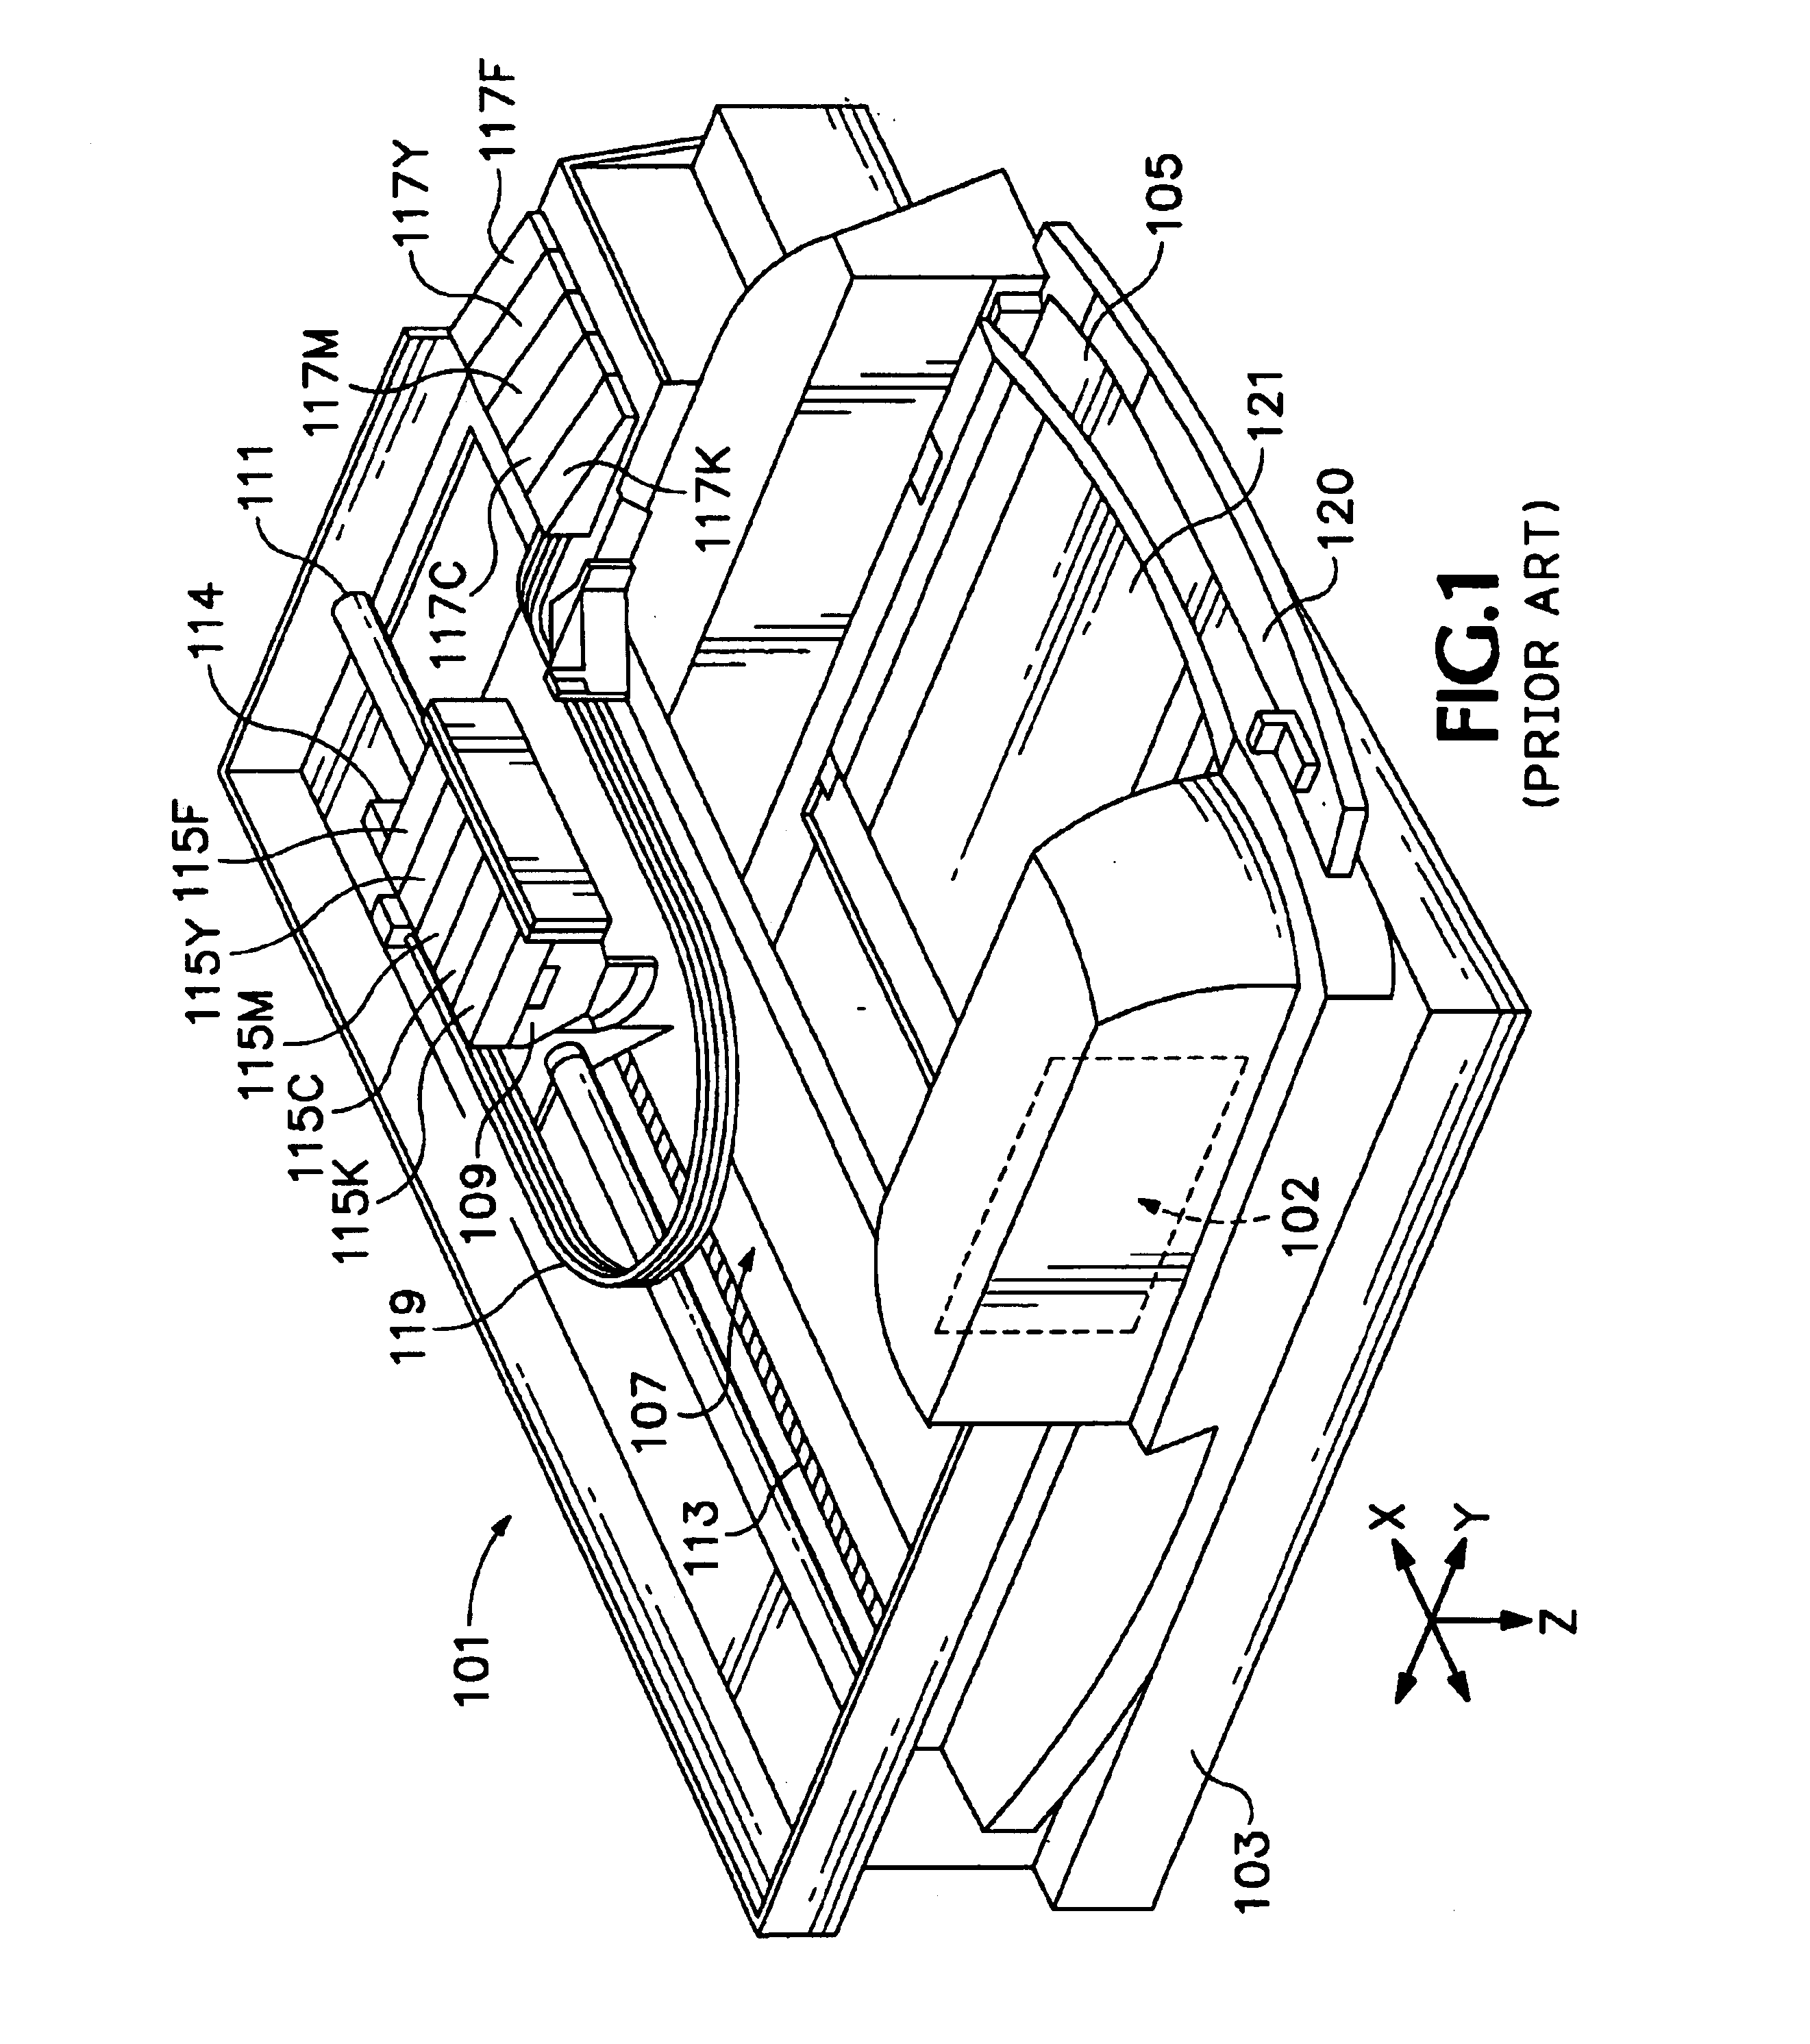 Carriage for ink-jet hard copy apparatus